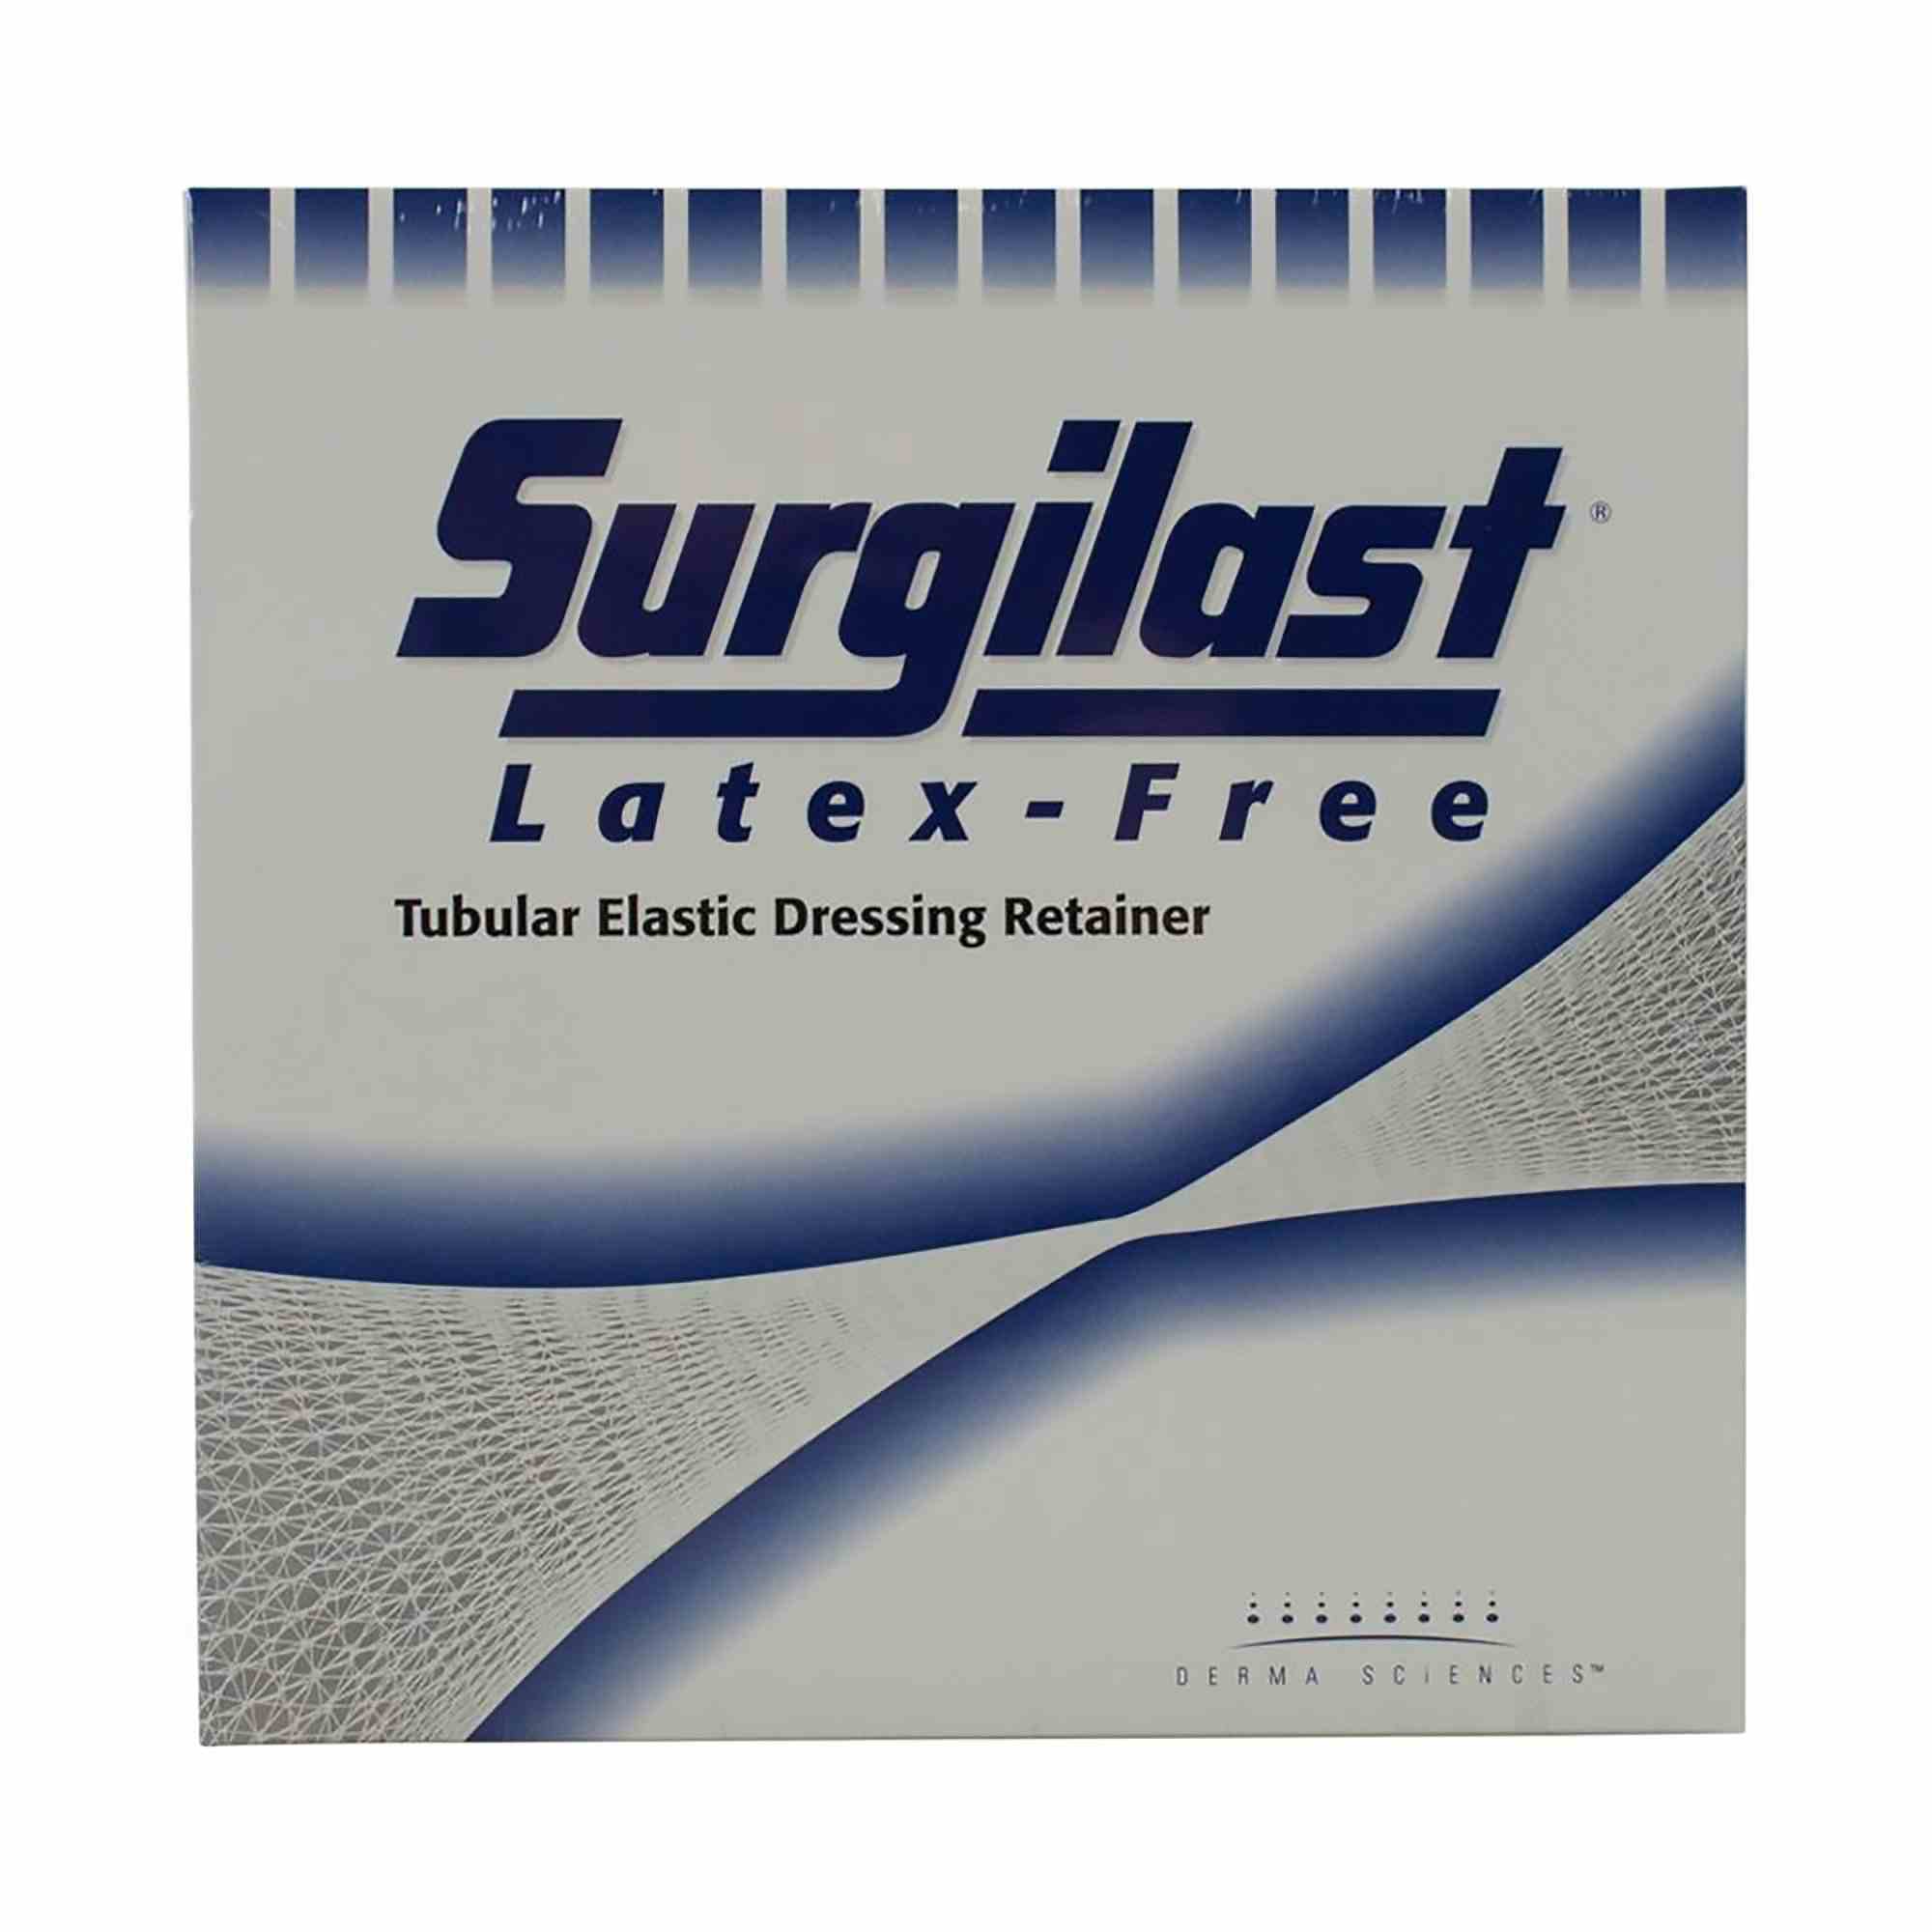 Surgilast Latex Free Tubular Elastic Dressing Retainer, 25 yds, GLLF2507, Size 7 (Small Chest/Back/Perineum/Axilla) - 1 Each